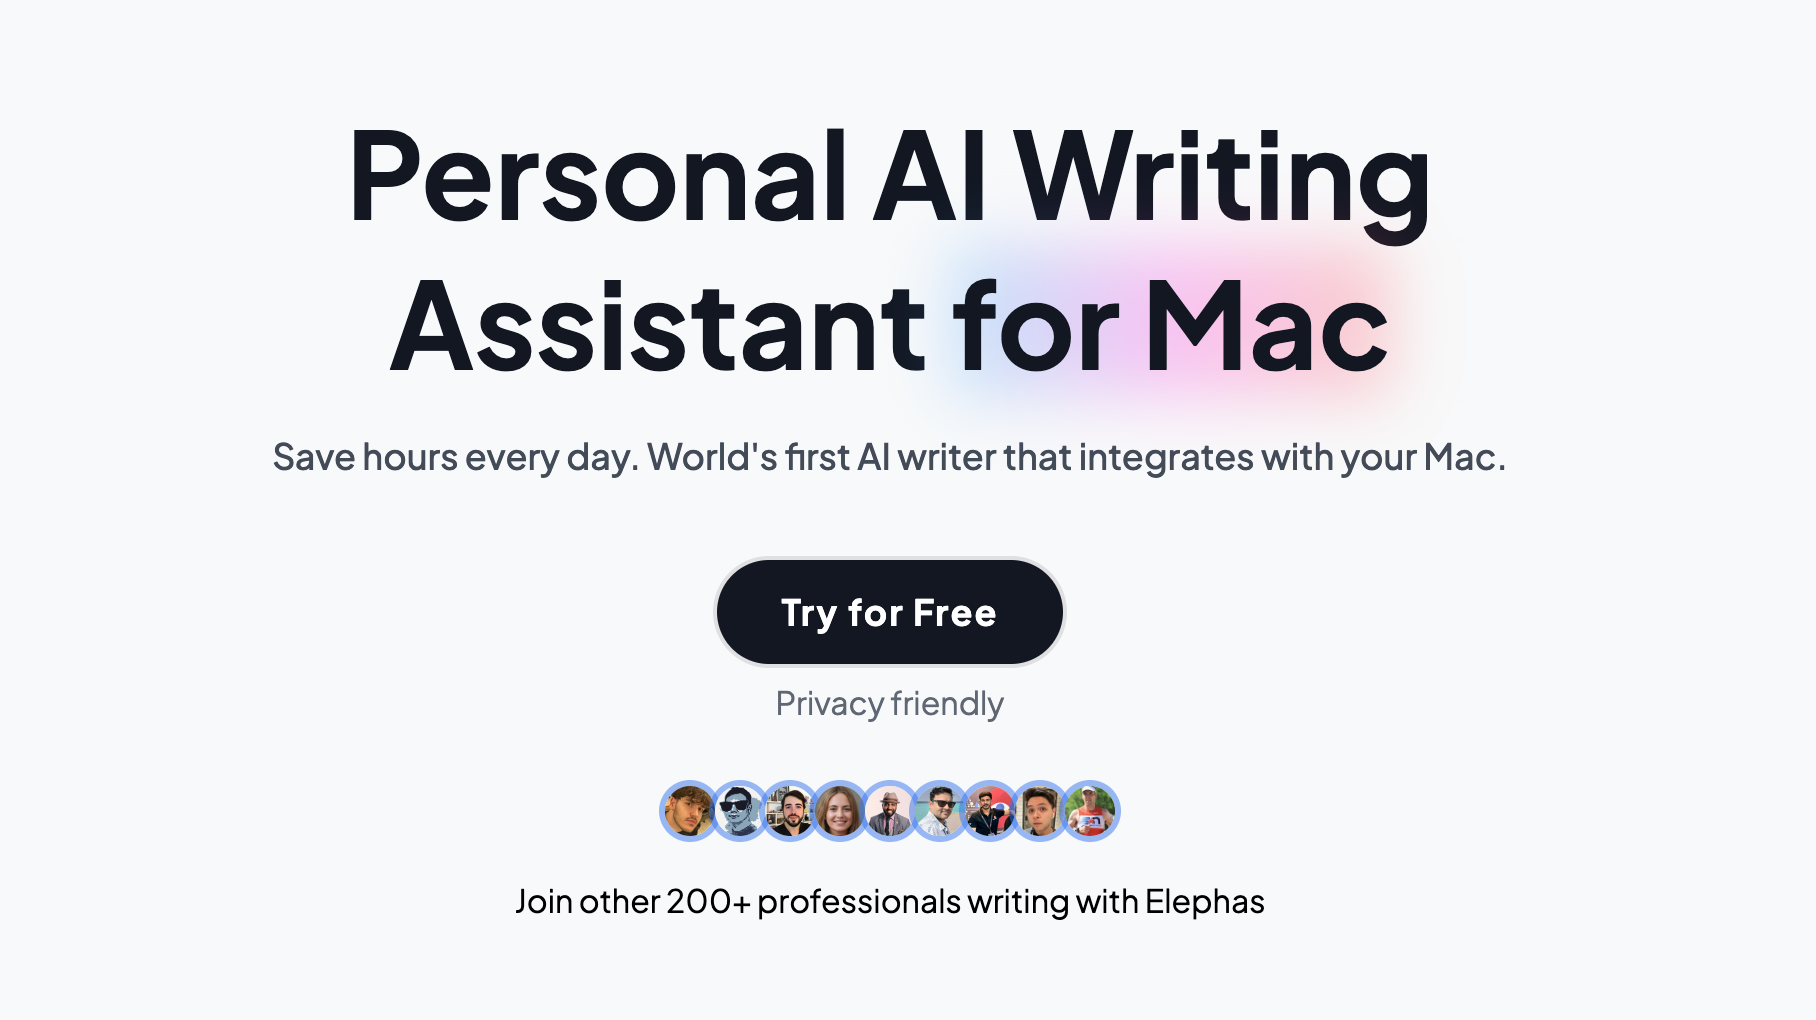 Elephas - AI writing assistant for Apple products